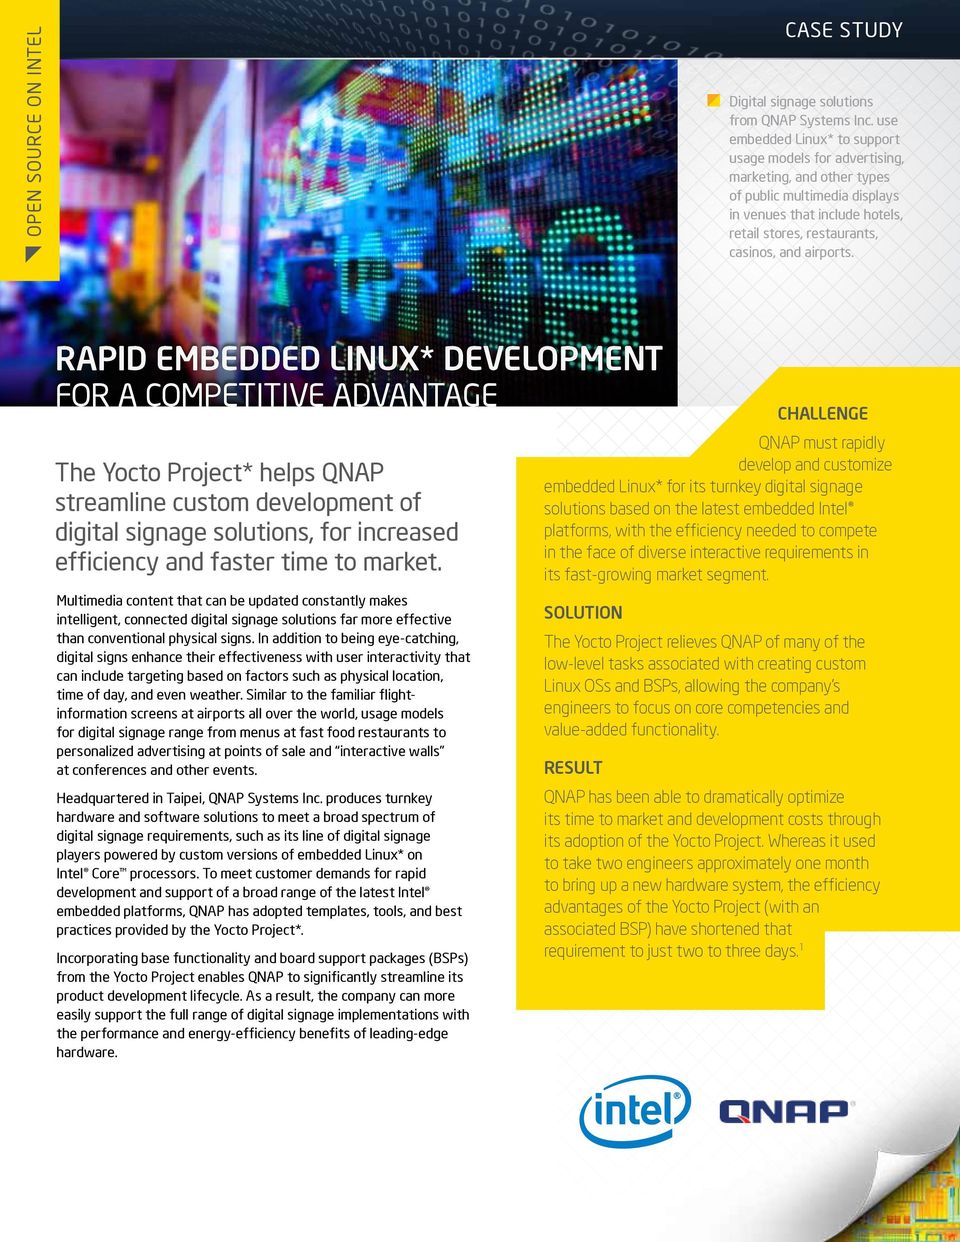 RAPID EMBEDDED LINUX* DEVELOPMENT FOR A COMPETITIVE ADVANTAGE The Yocto Project* helps QNAP streamline custom development of digital signage solutions, for increased efficiency and faster time to